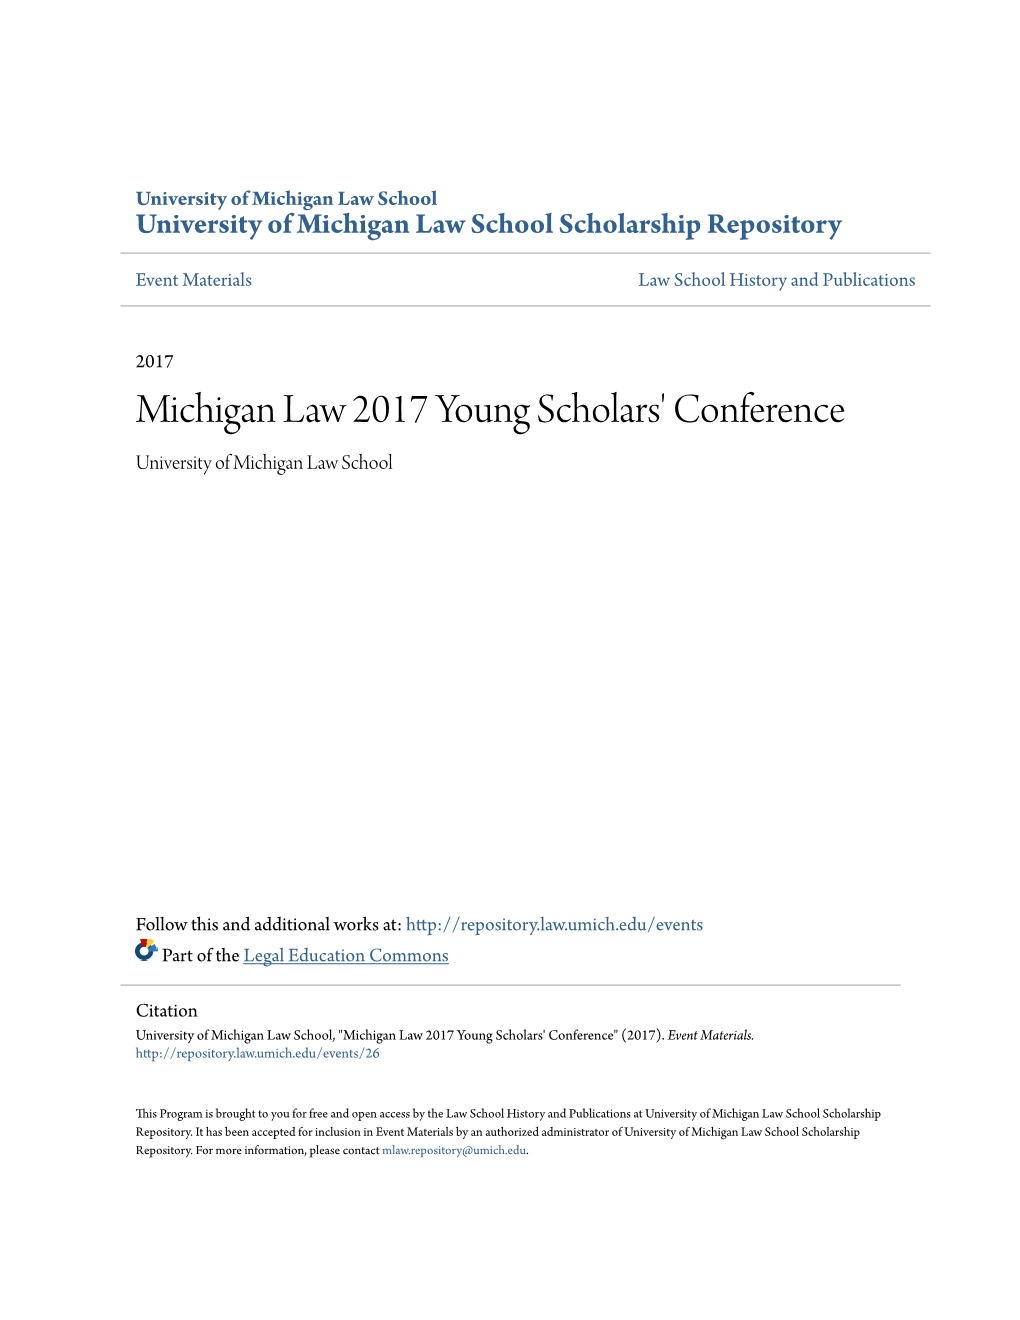 Michigan Law 2017 Young Scholars' Conference University of Michigan Law School